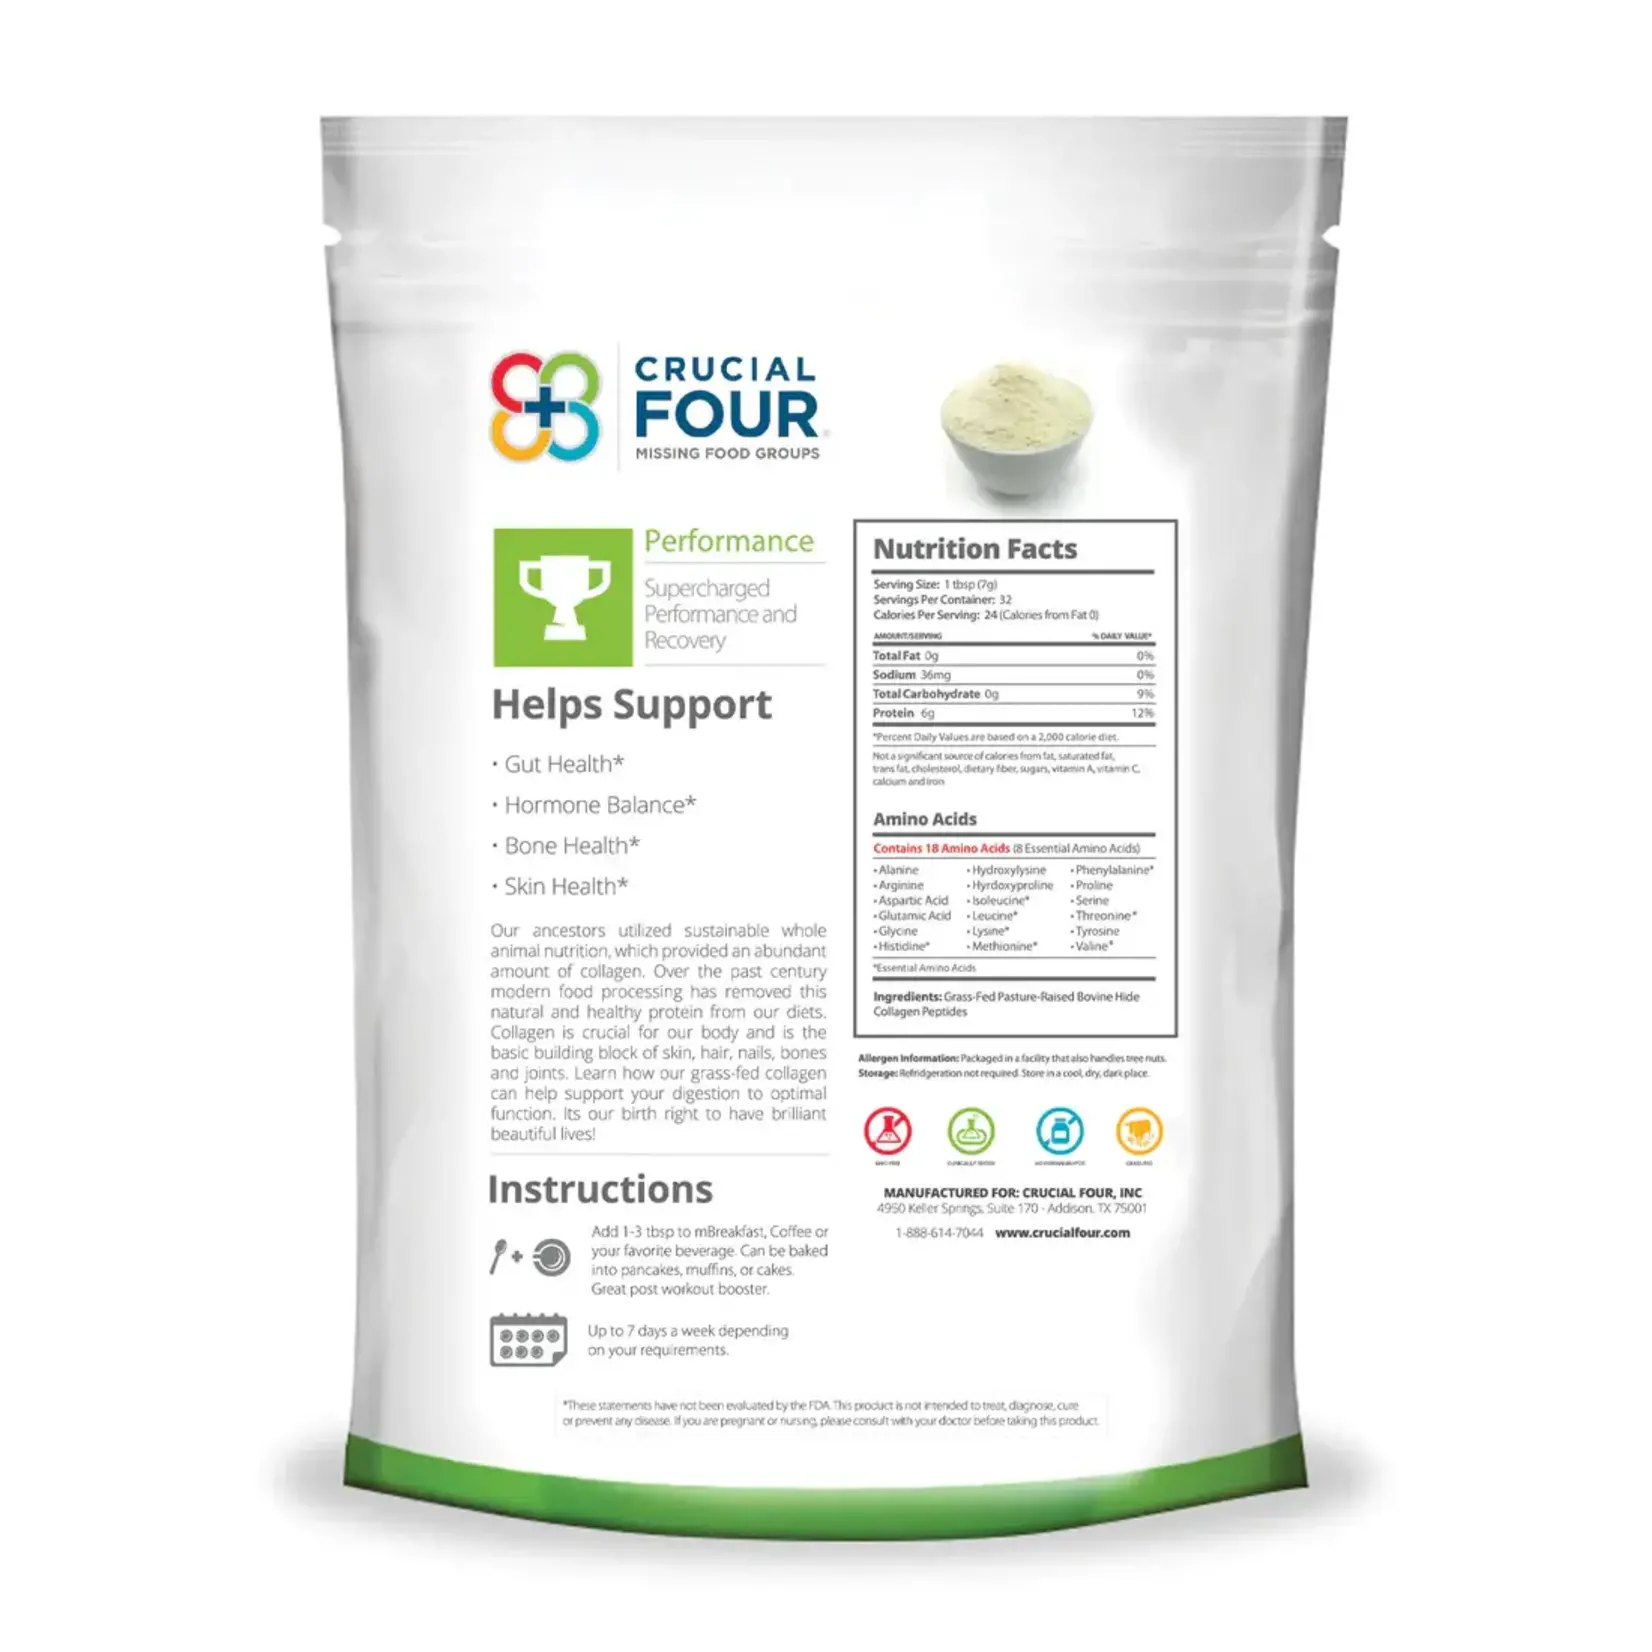 Crucial Four mCollagen (Crucial Four)